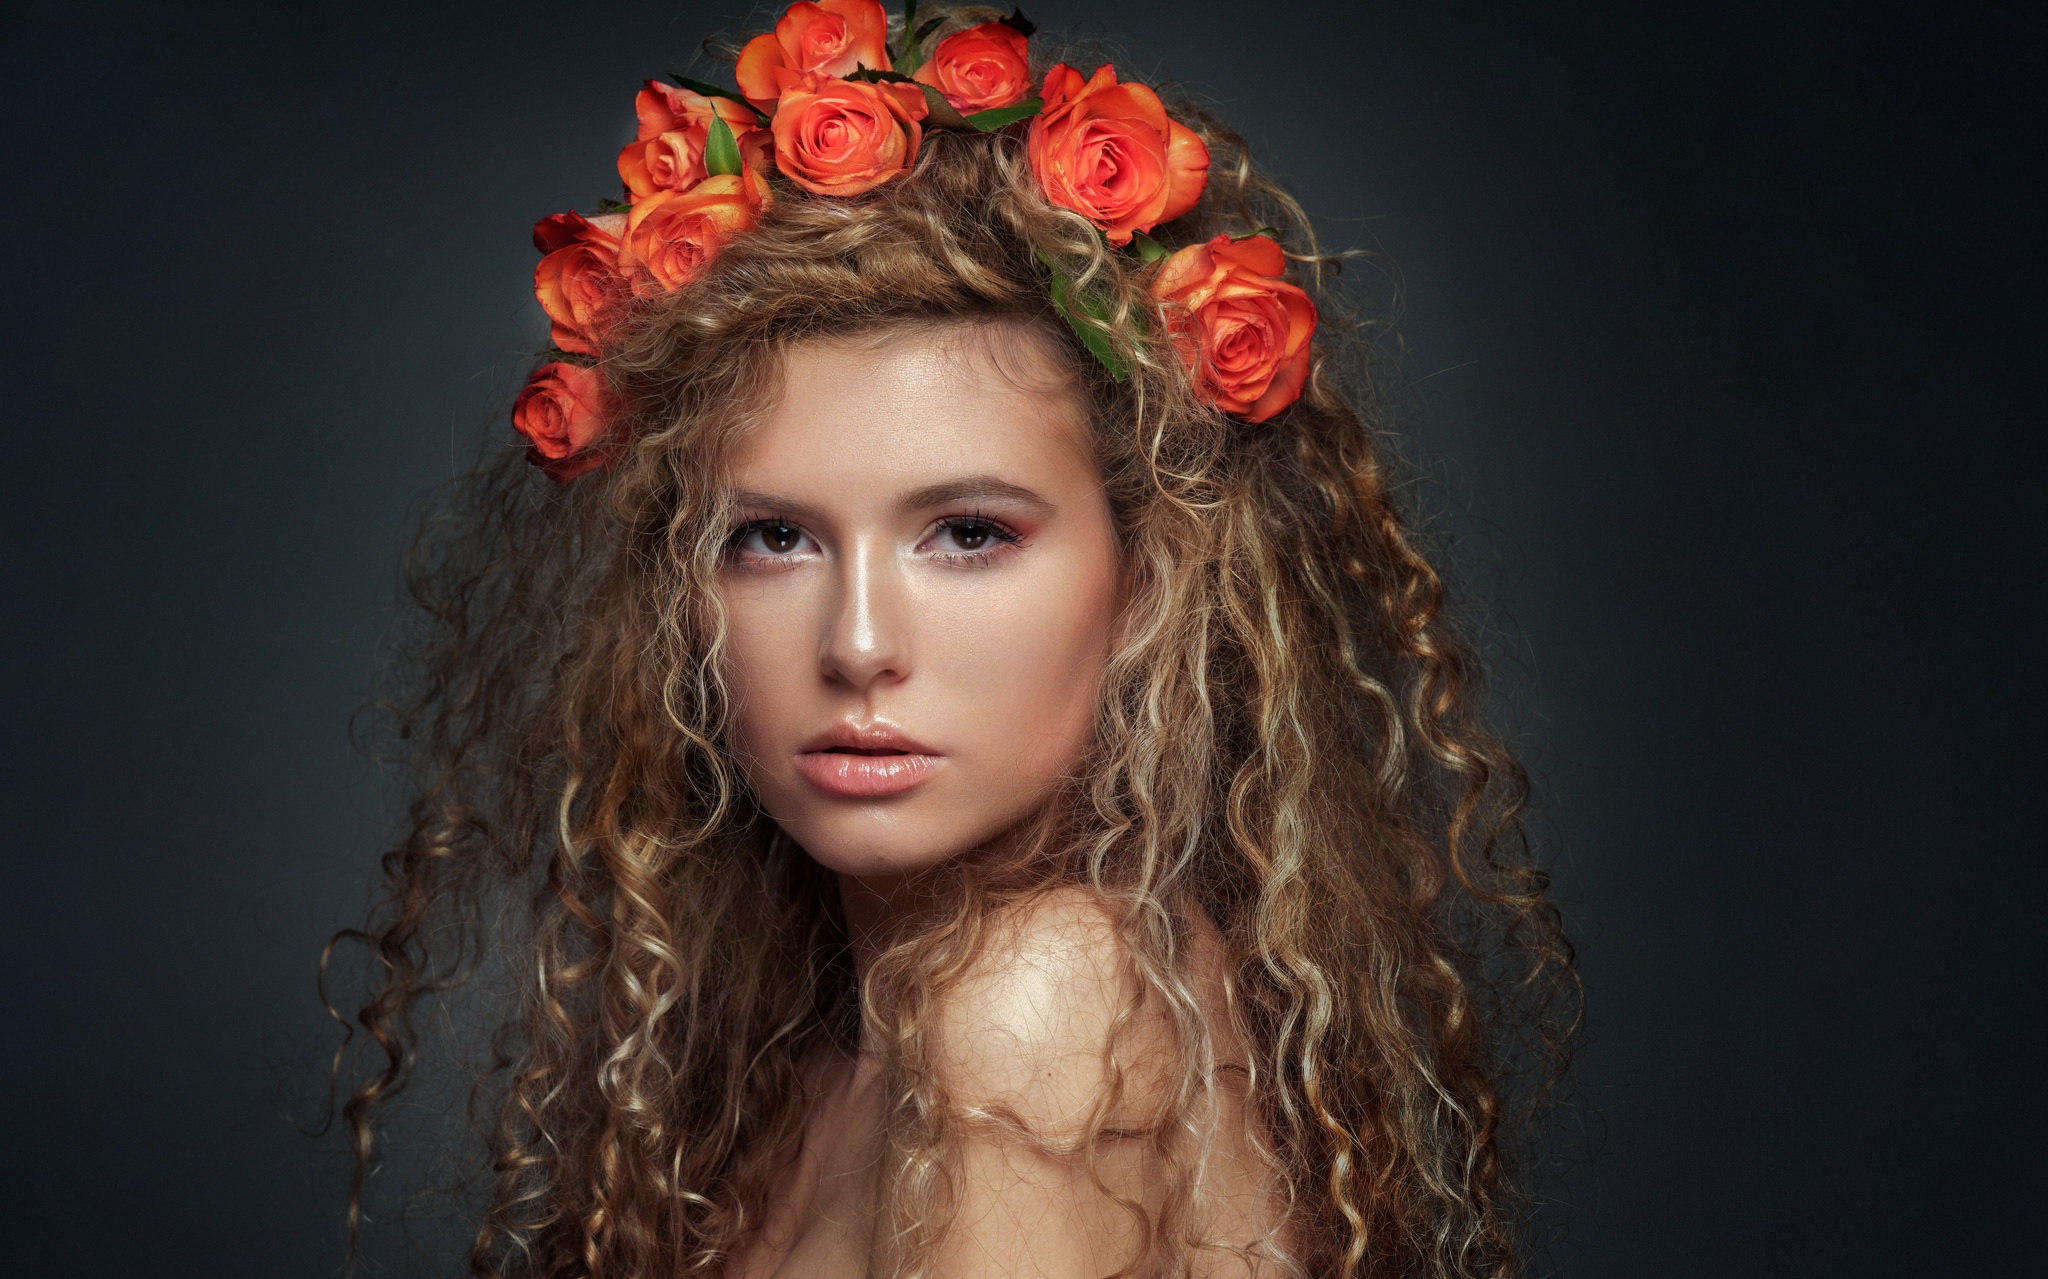 Simple Background Curly Hair Long Hair Flower In Hair Face Women Portrait Wallpaper Resolution